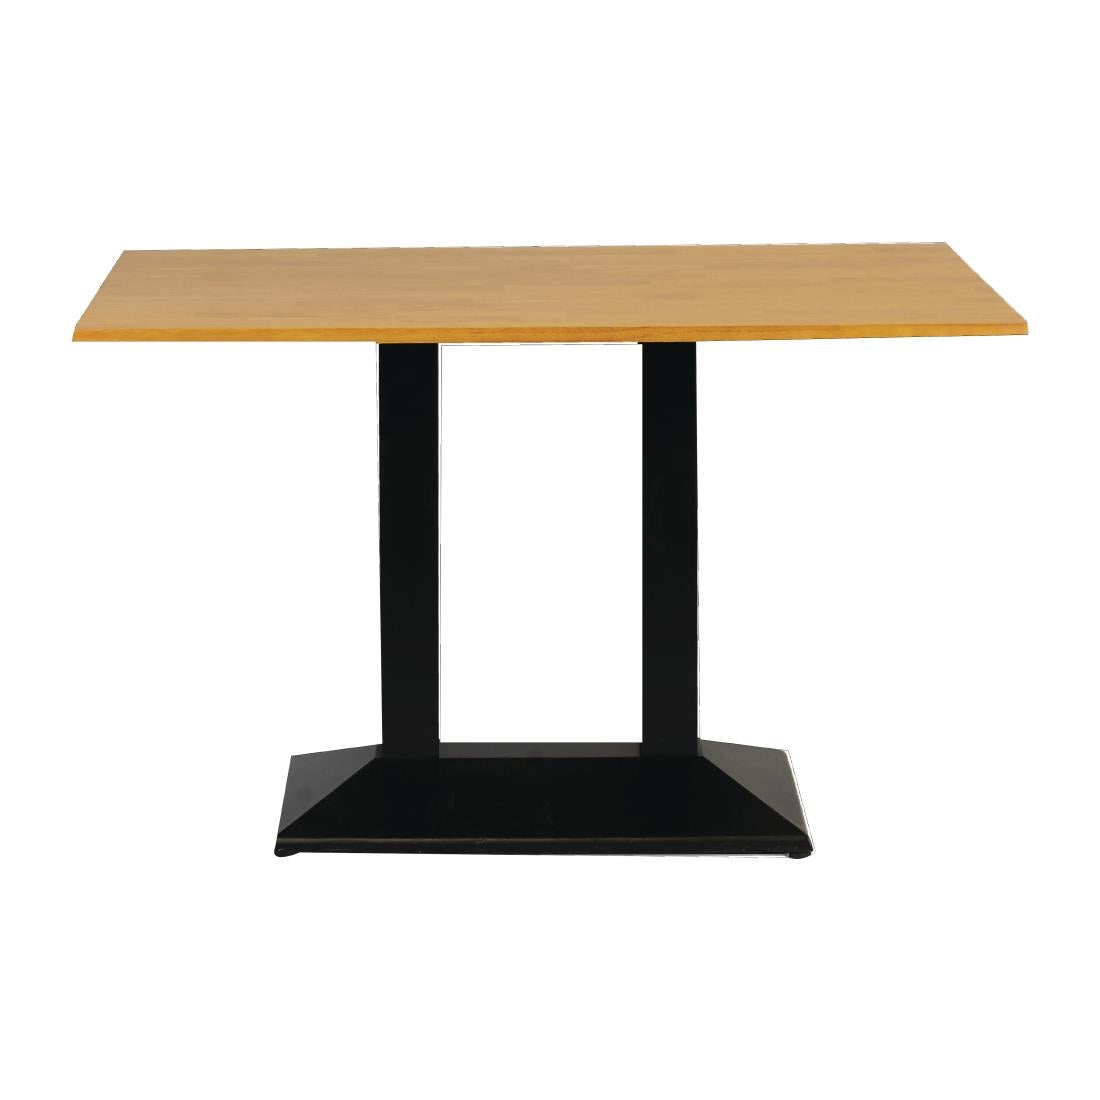 FT504 Turin Metal Base Pedestal Rectangle Table with Soft Oak Top 1200x700mm JD Catering Equipment Solutions Ltd